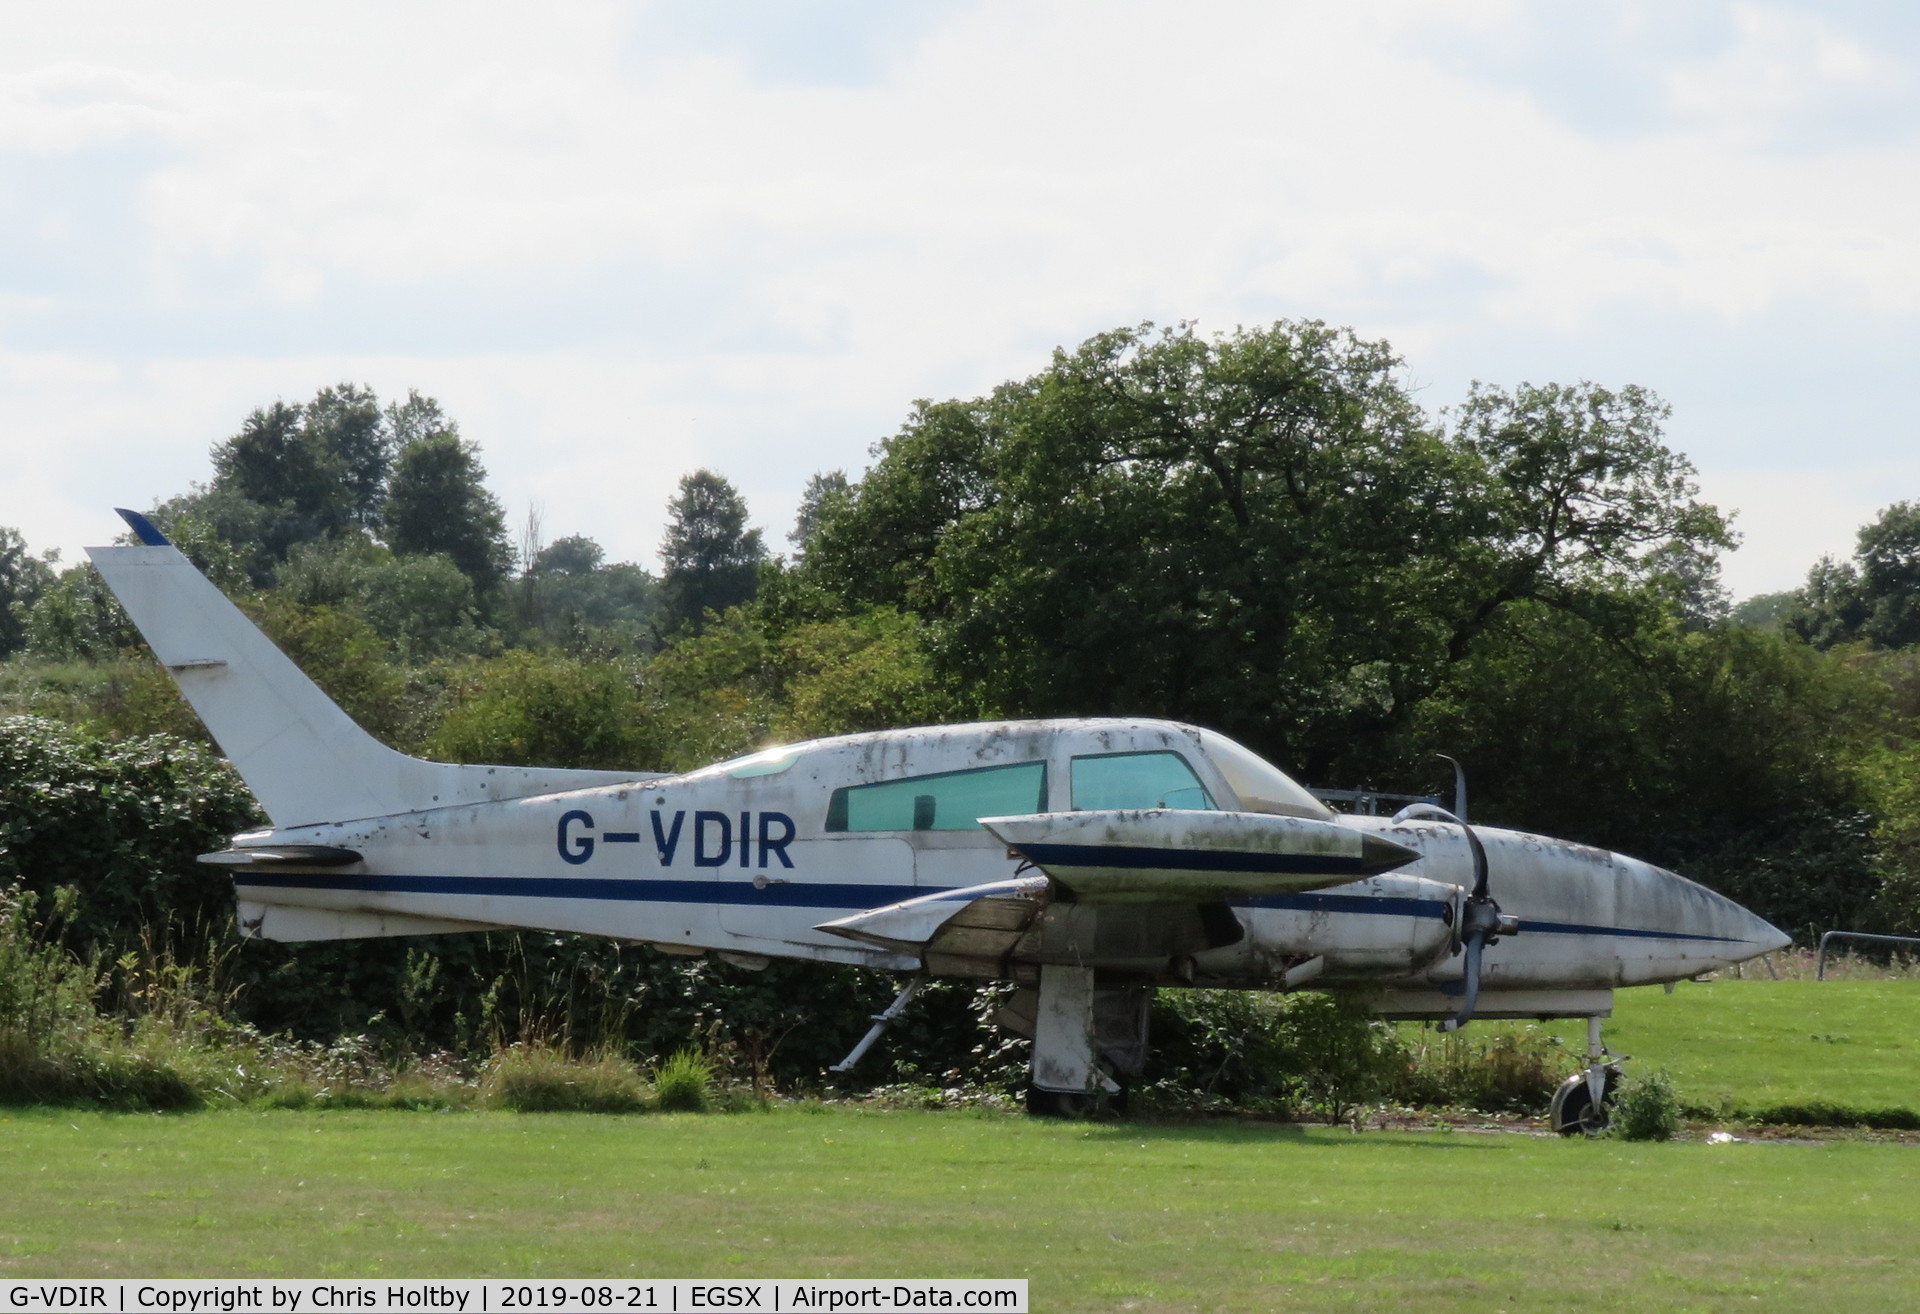 G-VDIR, 1975 Cessna T310R C/N 310R-0211, On the 14th. anniversary of her landing with gear collapsing & bent back props - she still survives (but only just).